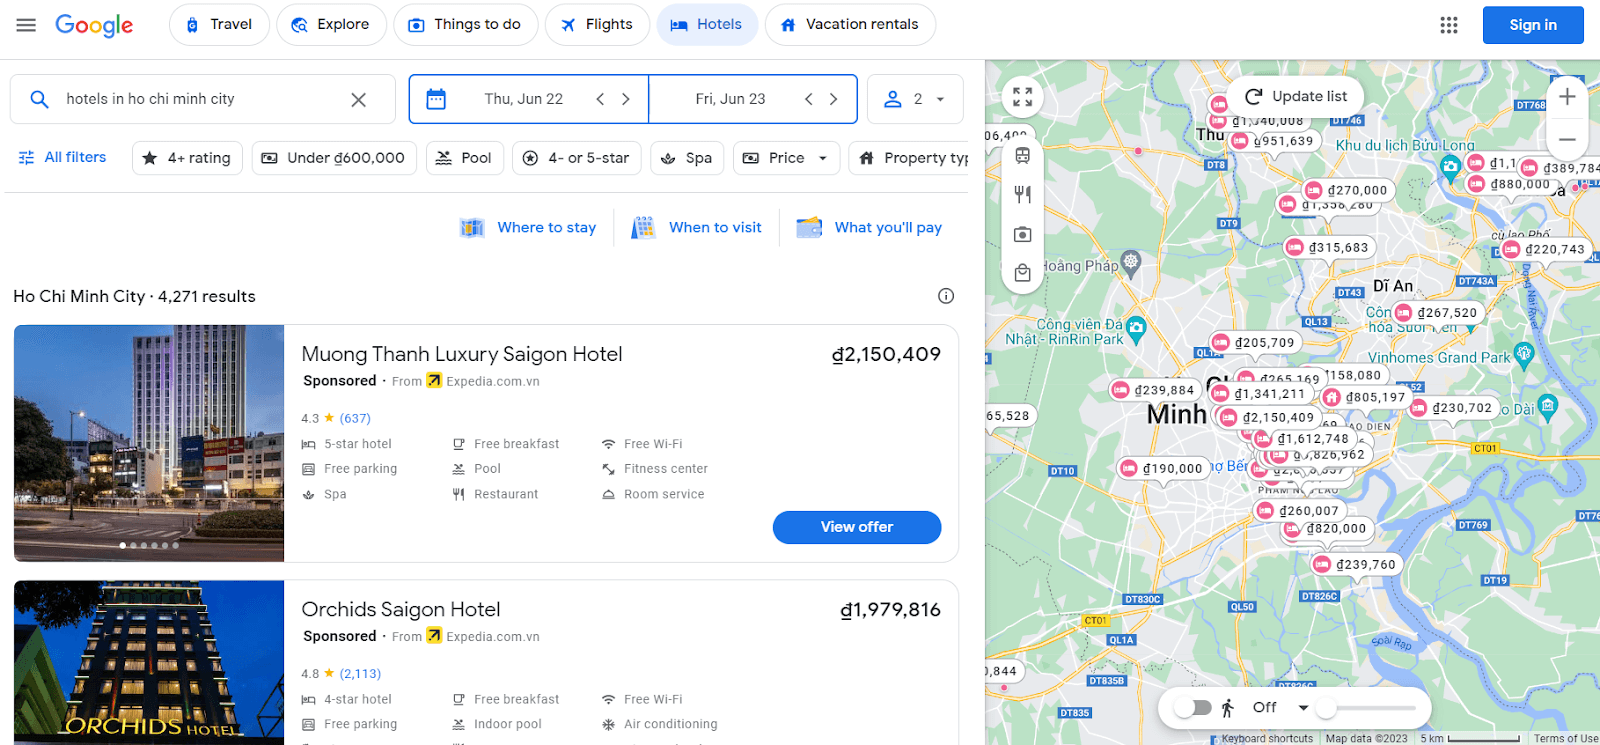 How to list your hotel on Google Maps Image 1